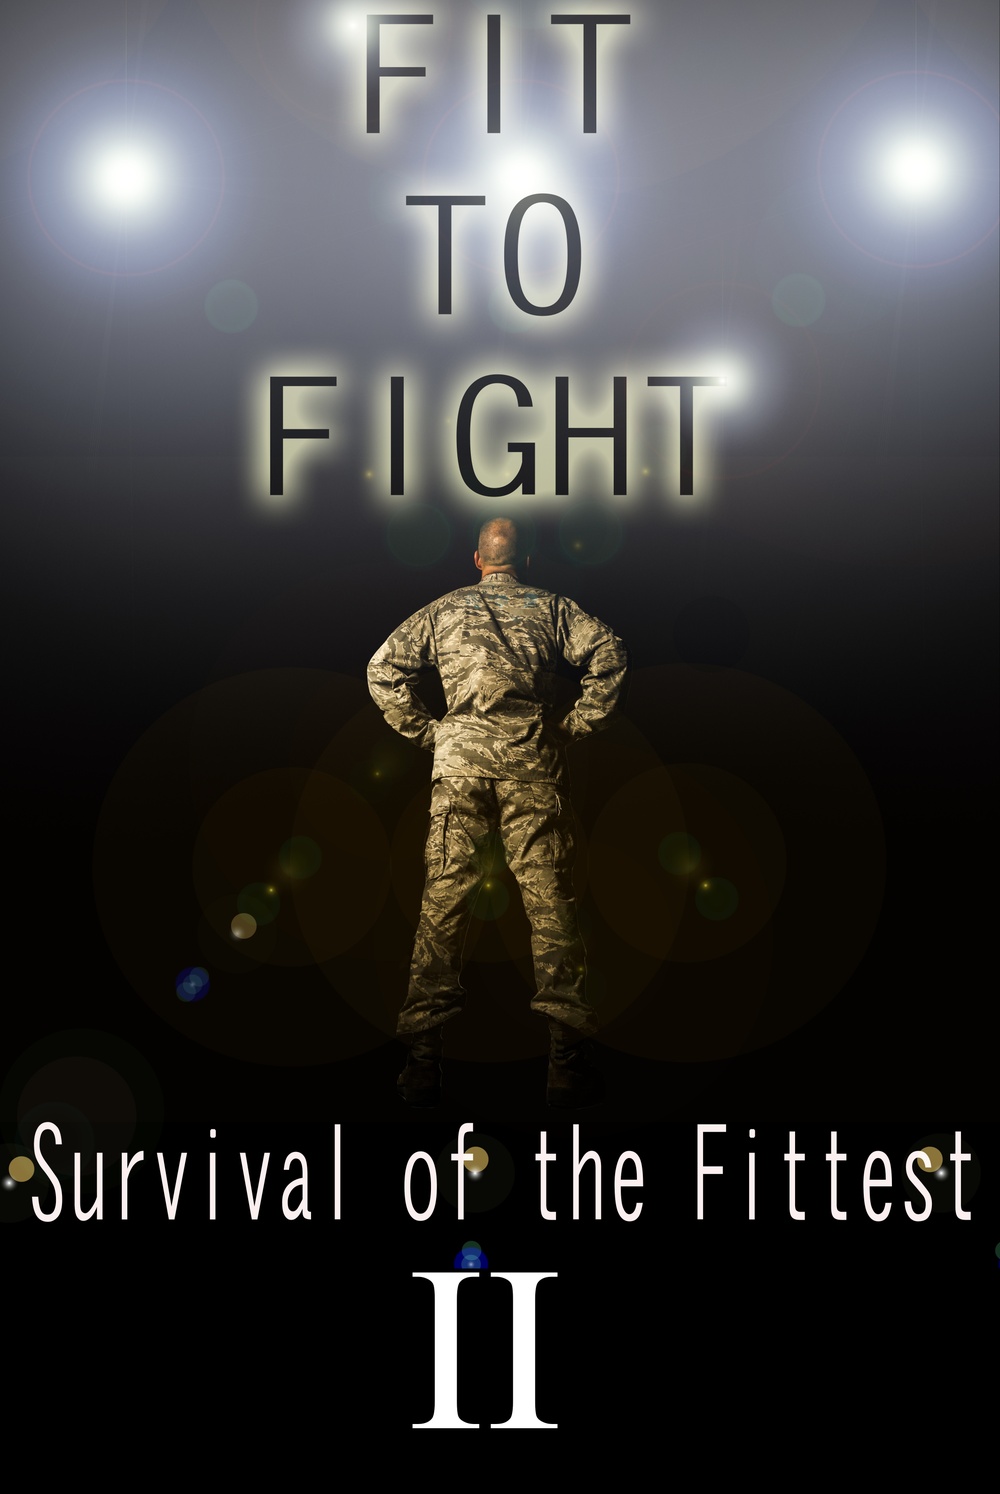 Survival of the Fittest: Fit to Fight